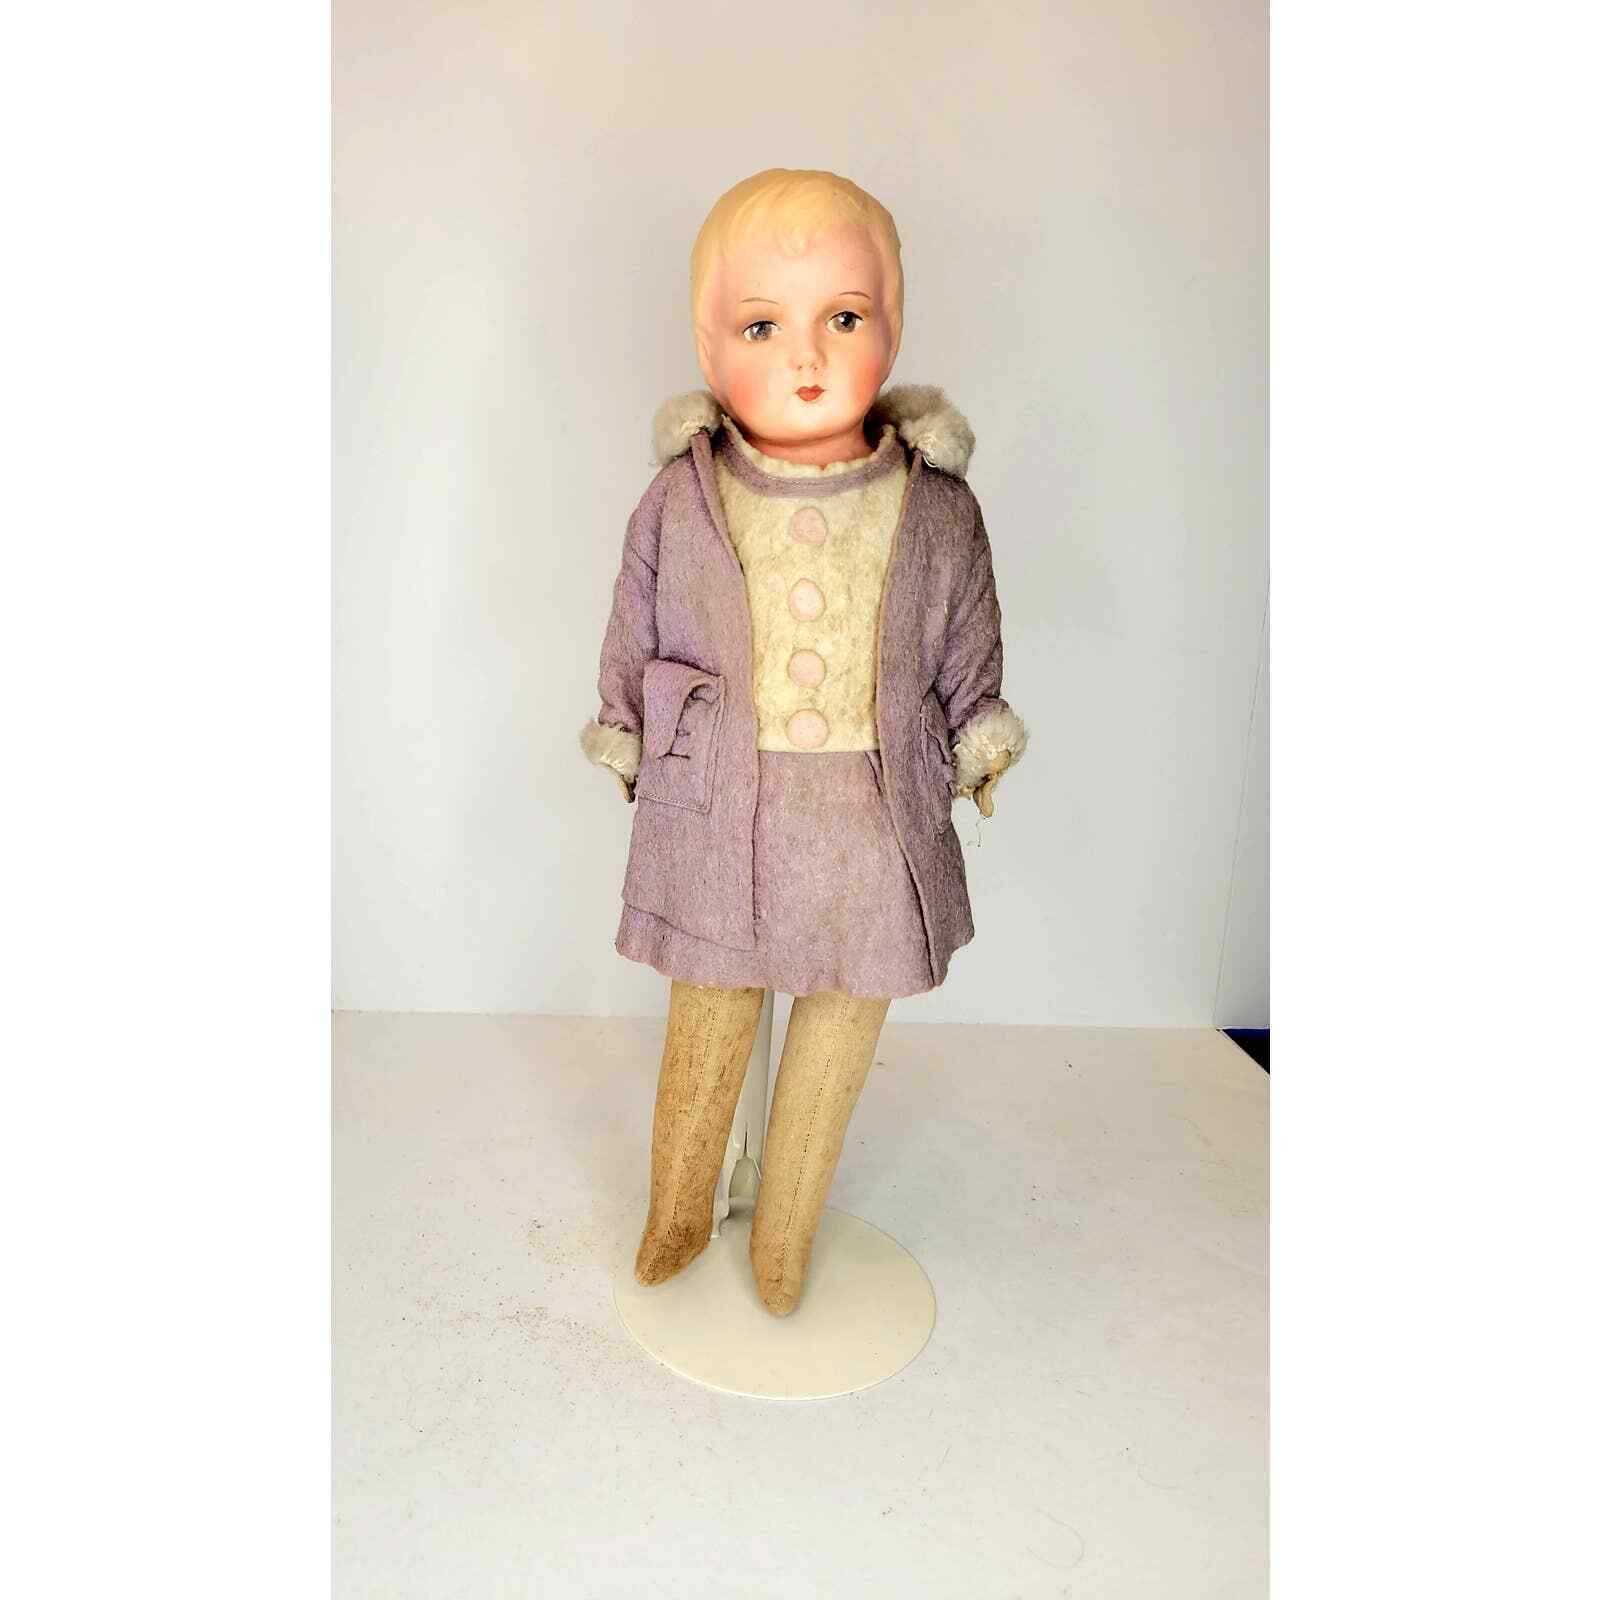 Vintage Composition Modeled Hair Cloth Body 1940s Doll